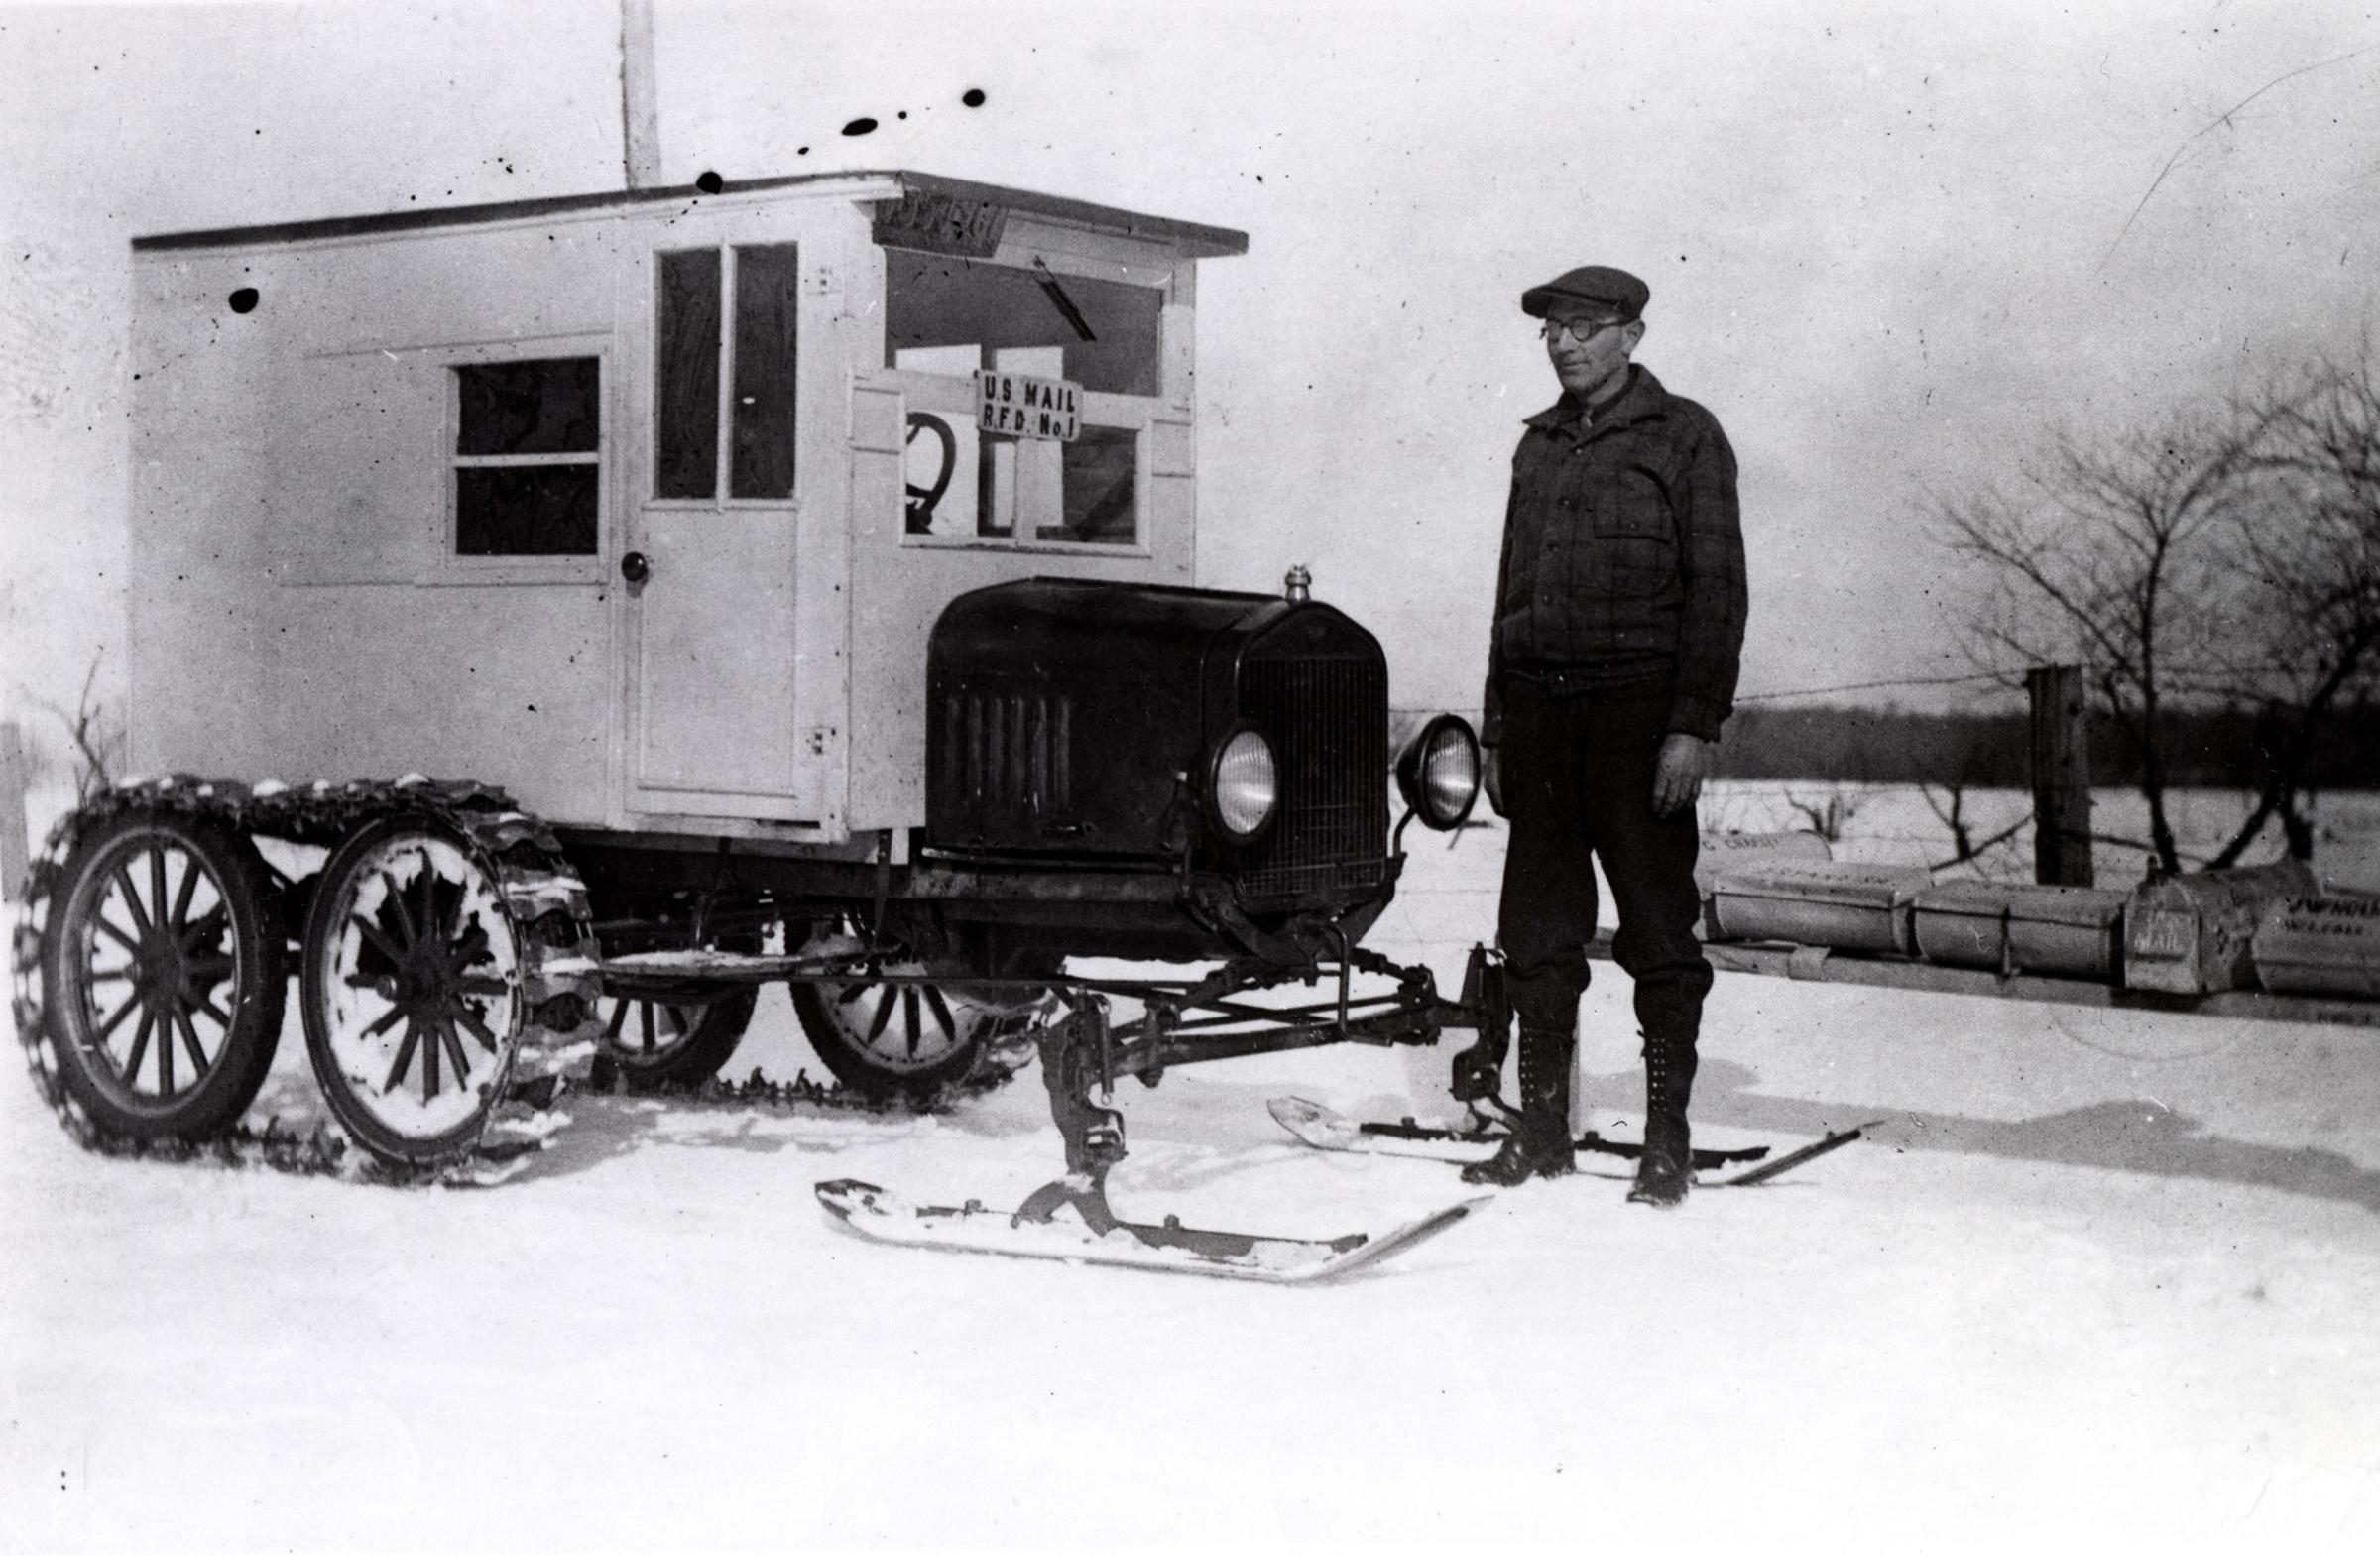 Rural carrier Lloyd Mortice created this unusual vehicle for use on his snow-bound New England route. Mortice fitted his 1926 Model-T with a steel track on the rear drive shaft, enabling him to drop either wheels or skis into place in front, depending on weather conditions. The company that sold Mortice the steel track later produced a similar vehicle based on the carrier's idea. 1926.